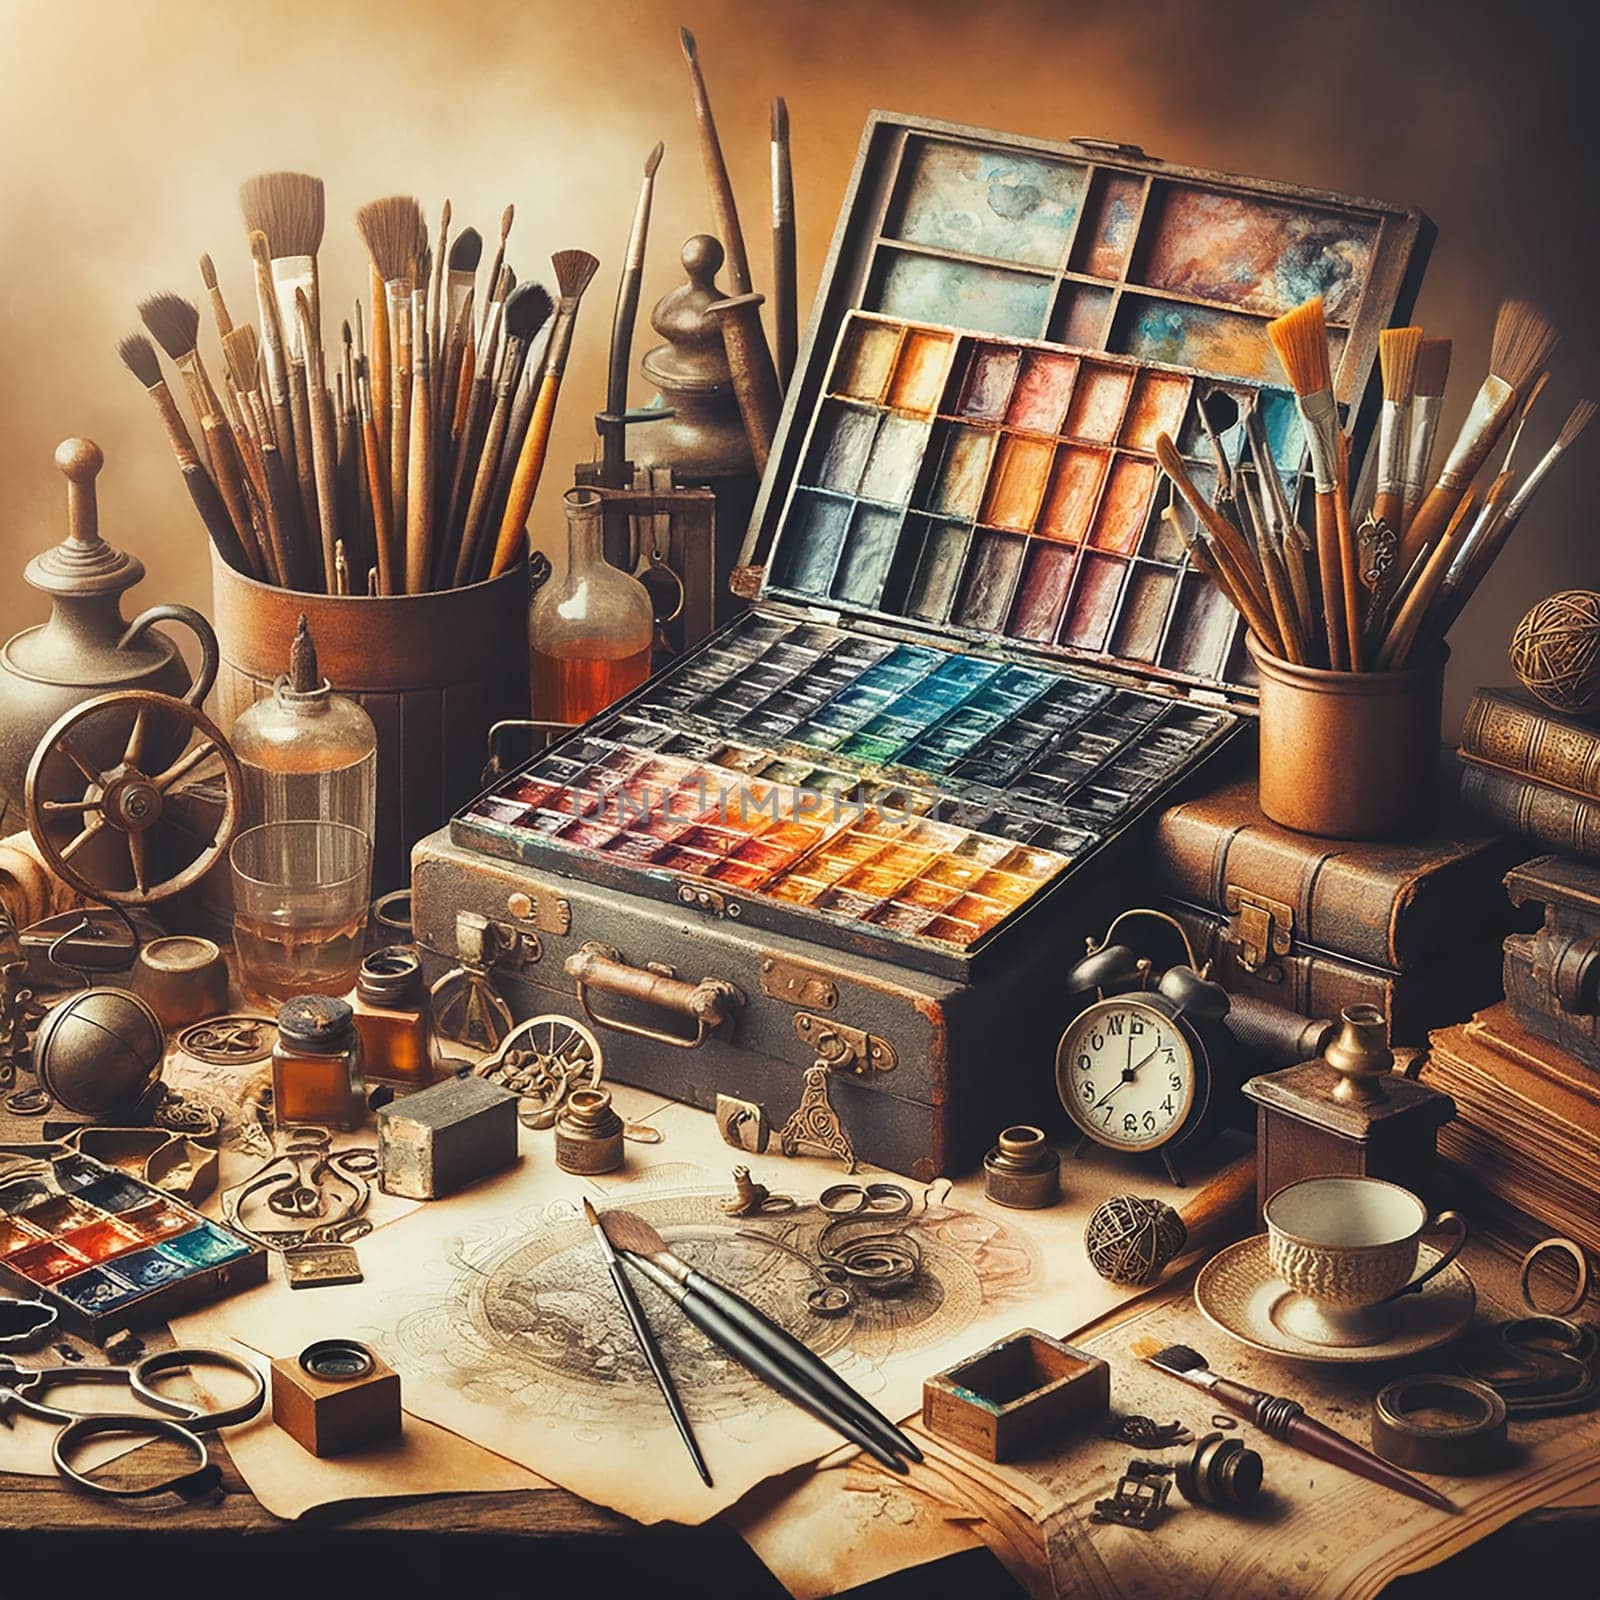 Artistic Workspace Delight: Watercolor Brushes and Paper Setup